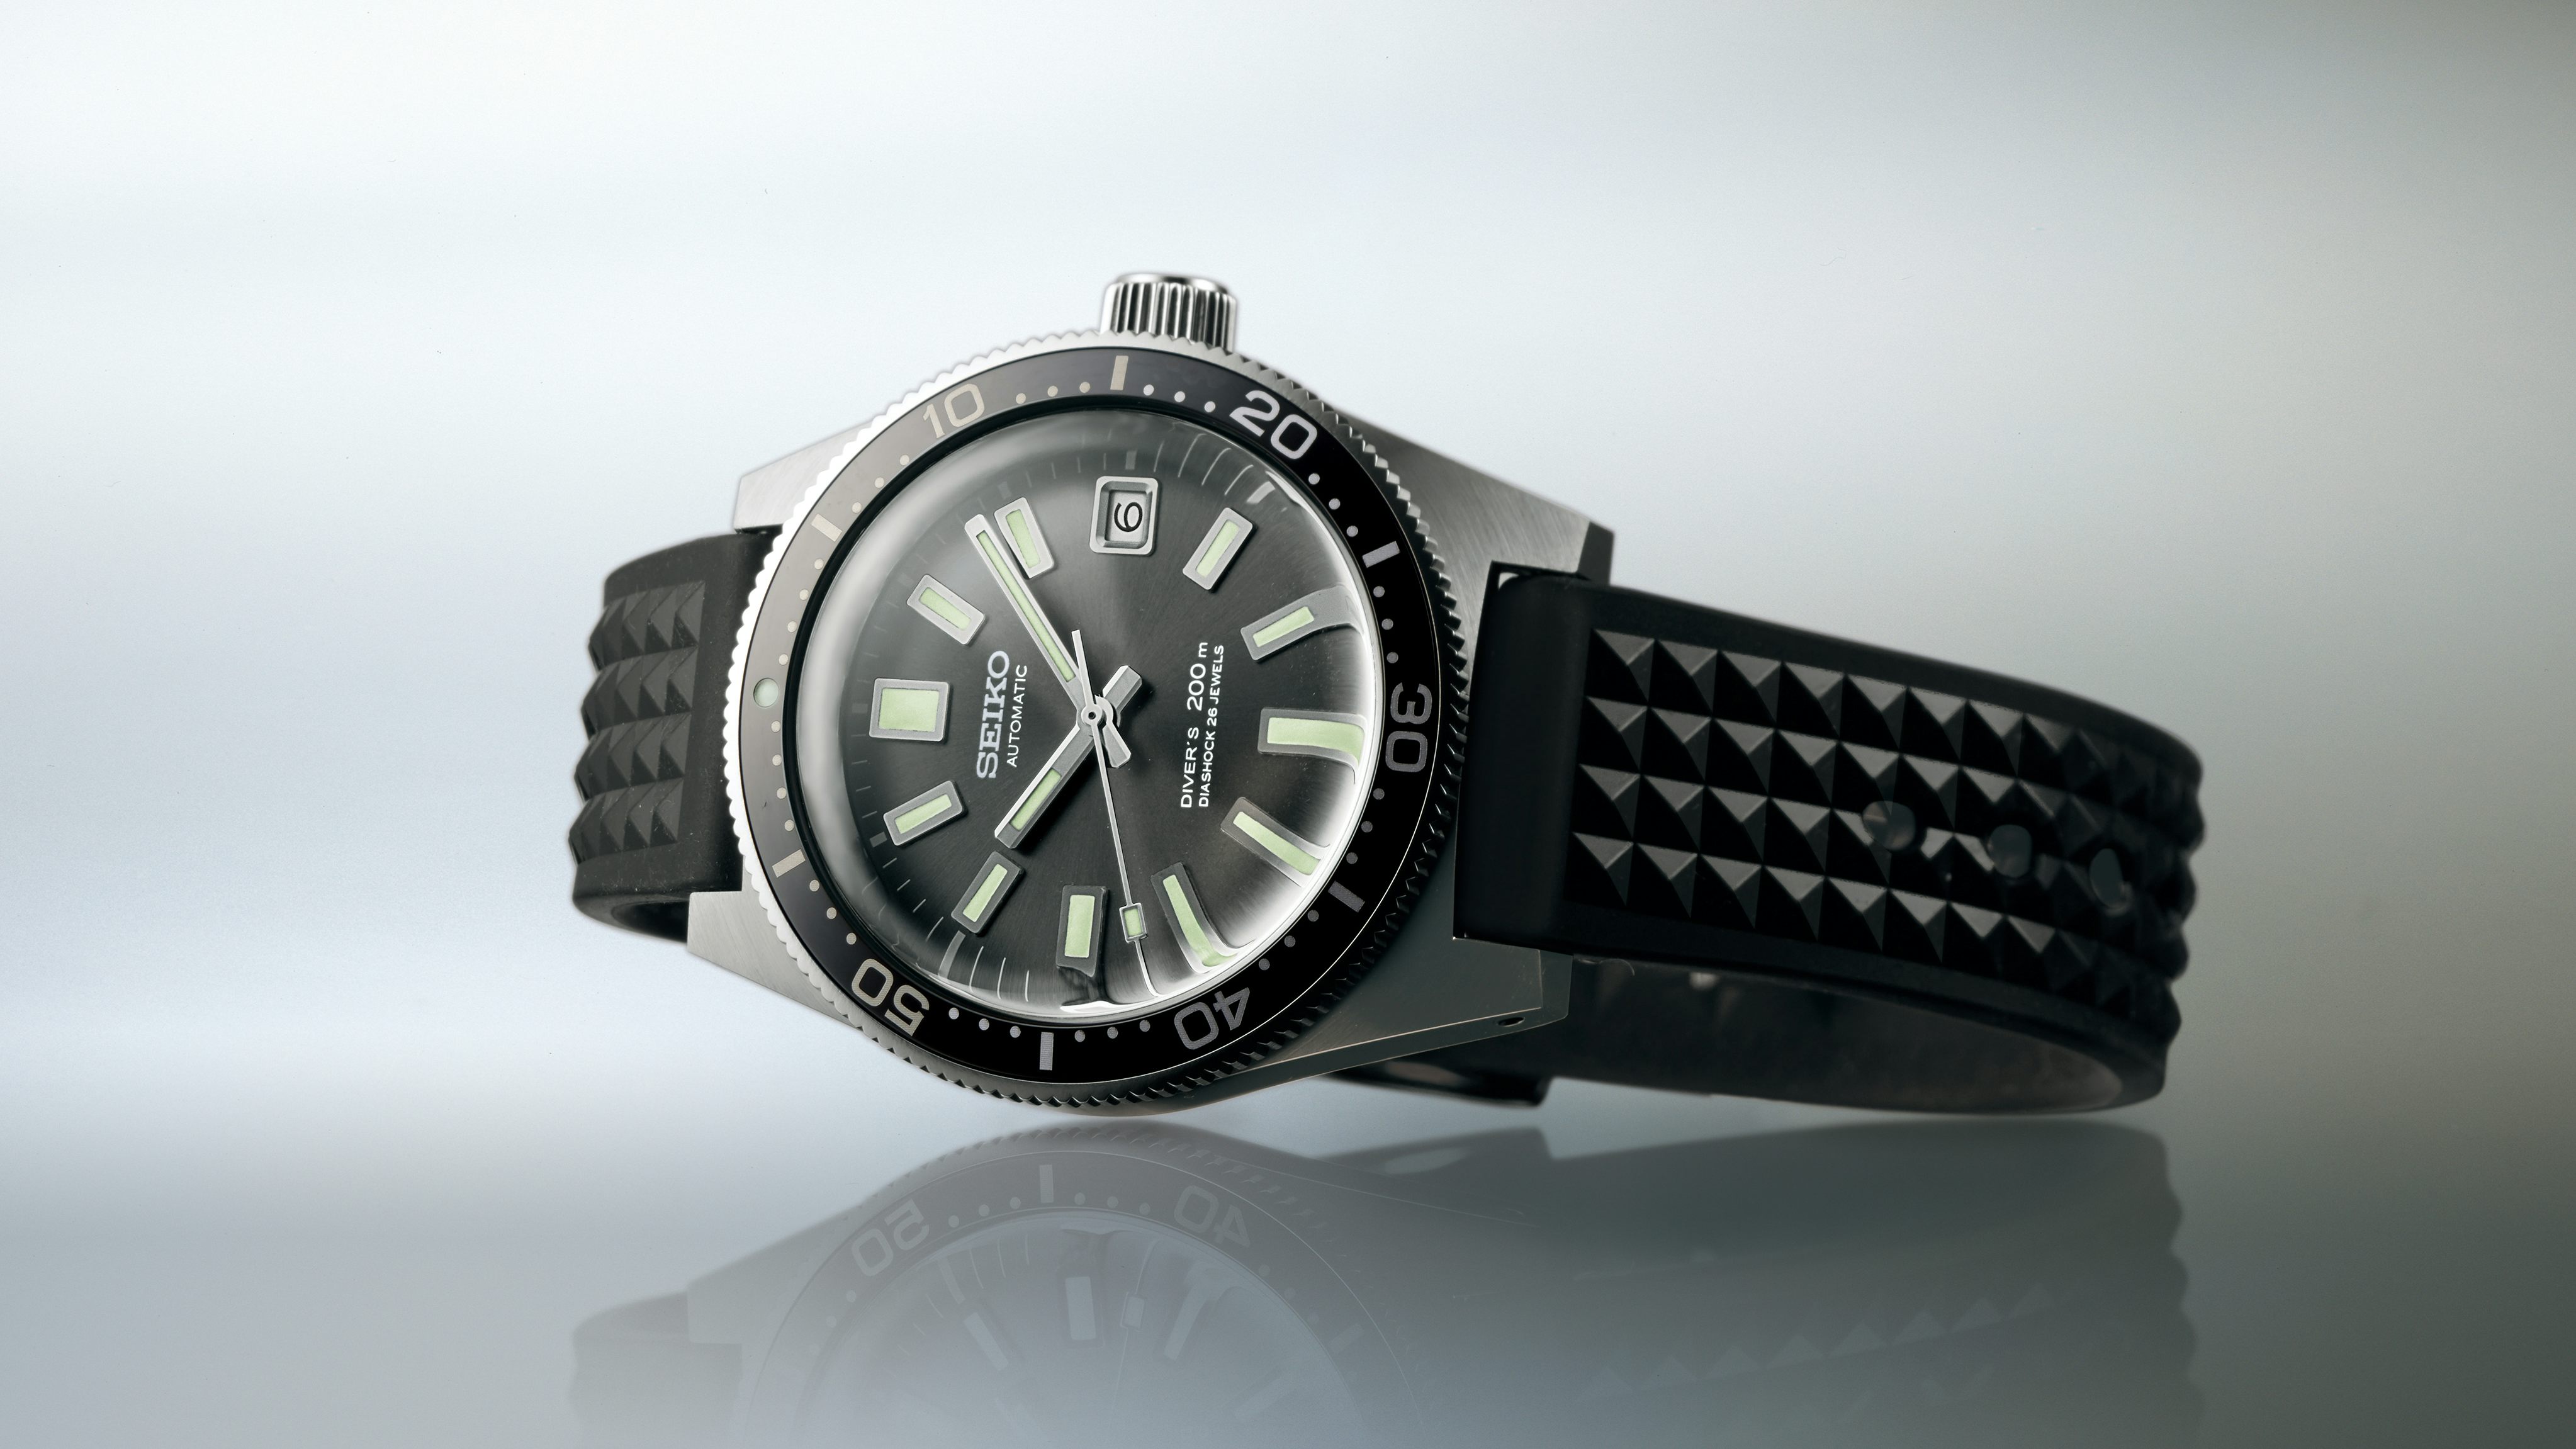 Introducing: The Seiko Prospex Diver And The Diver SPB051/53 - Hodinkee